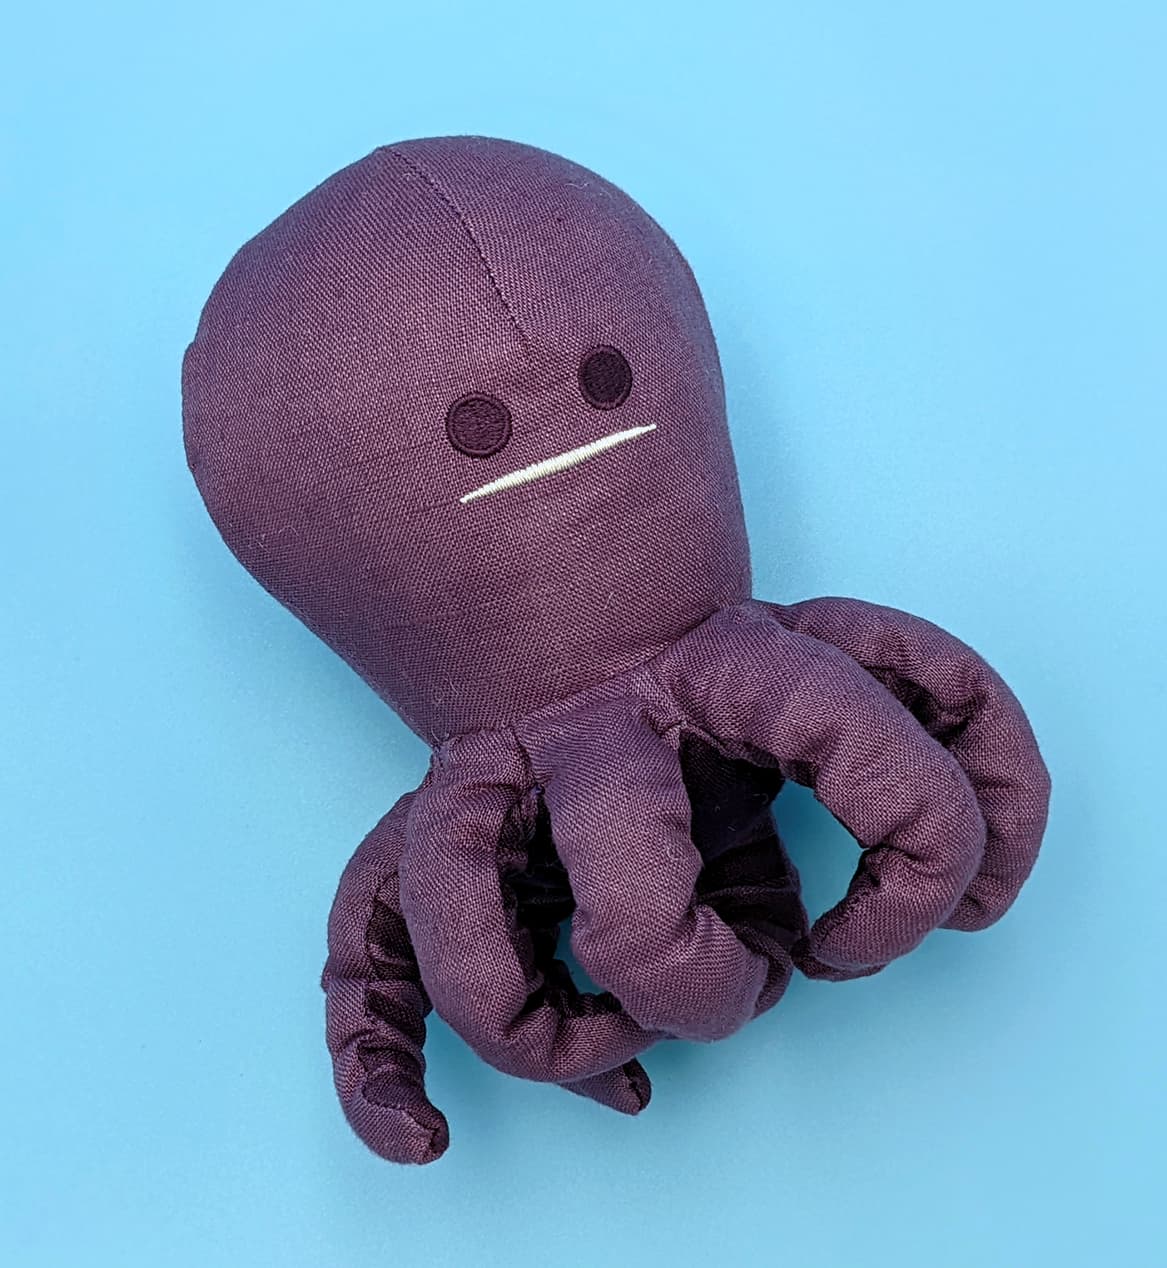 Octo - Stretchy legs octopus dog toy